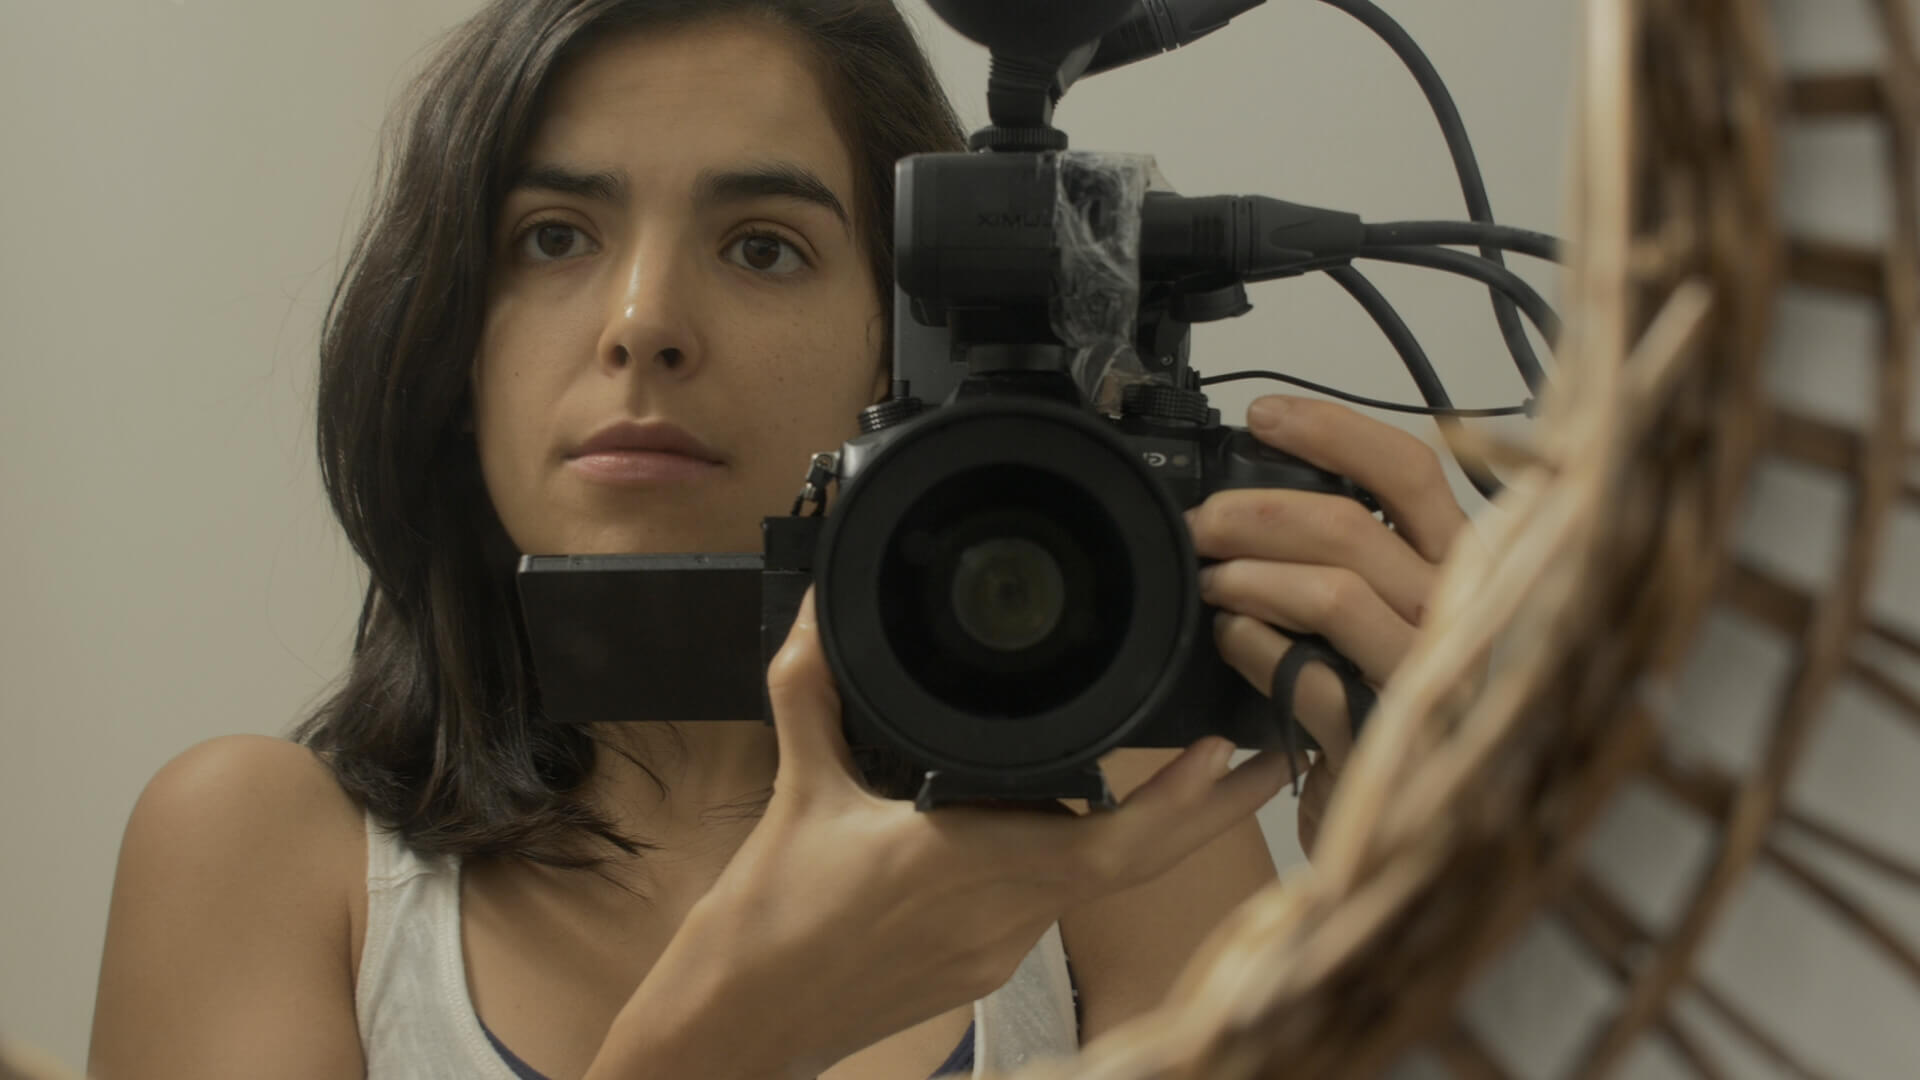 A woman holding a camera in front of a mirror with the mirror's frame visible